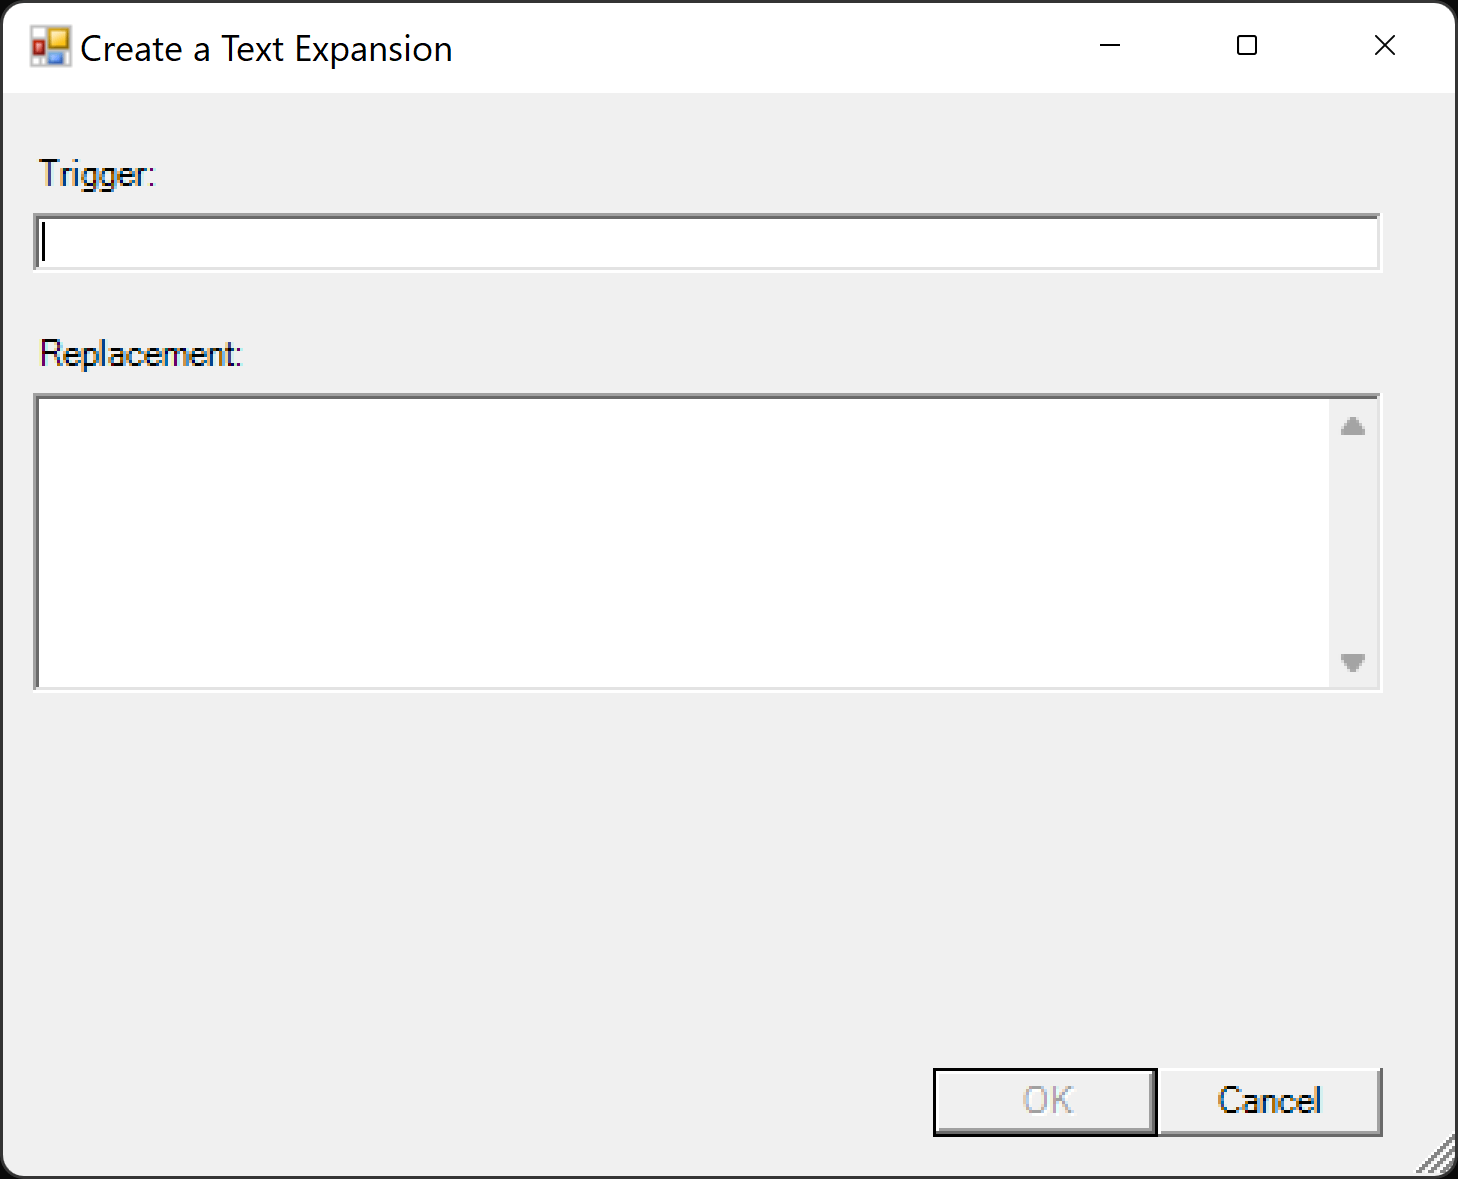 GUI for adding a text expansion